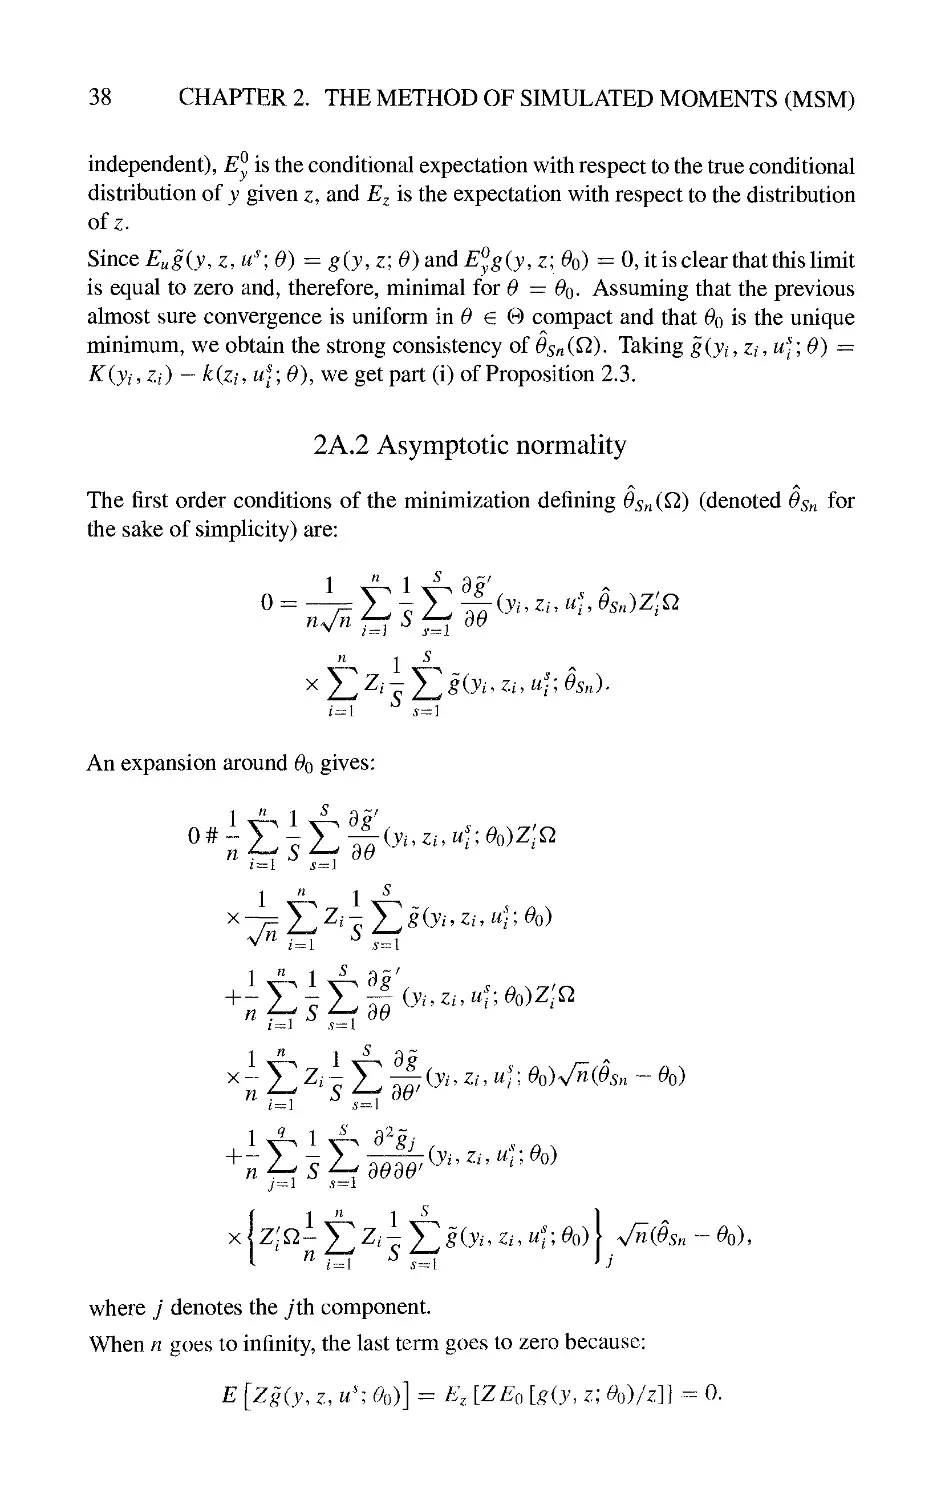 2A.2 Asymptotic normality